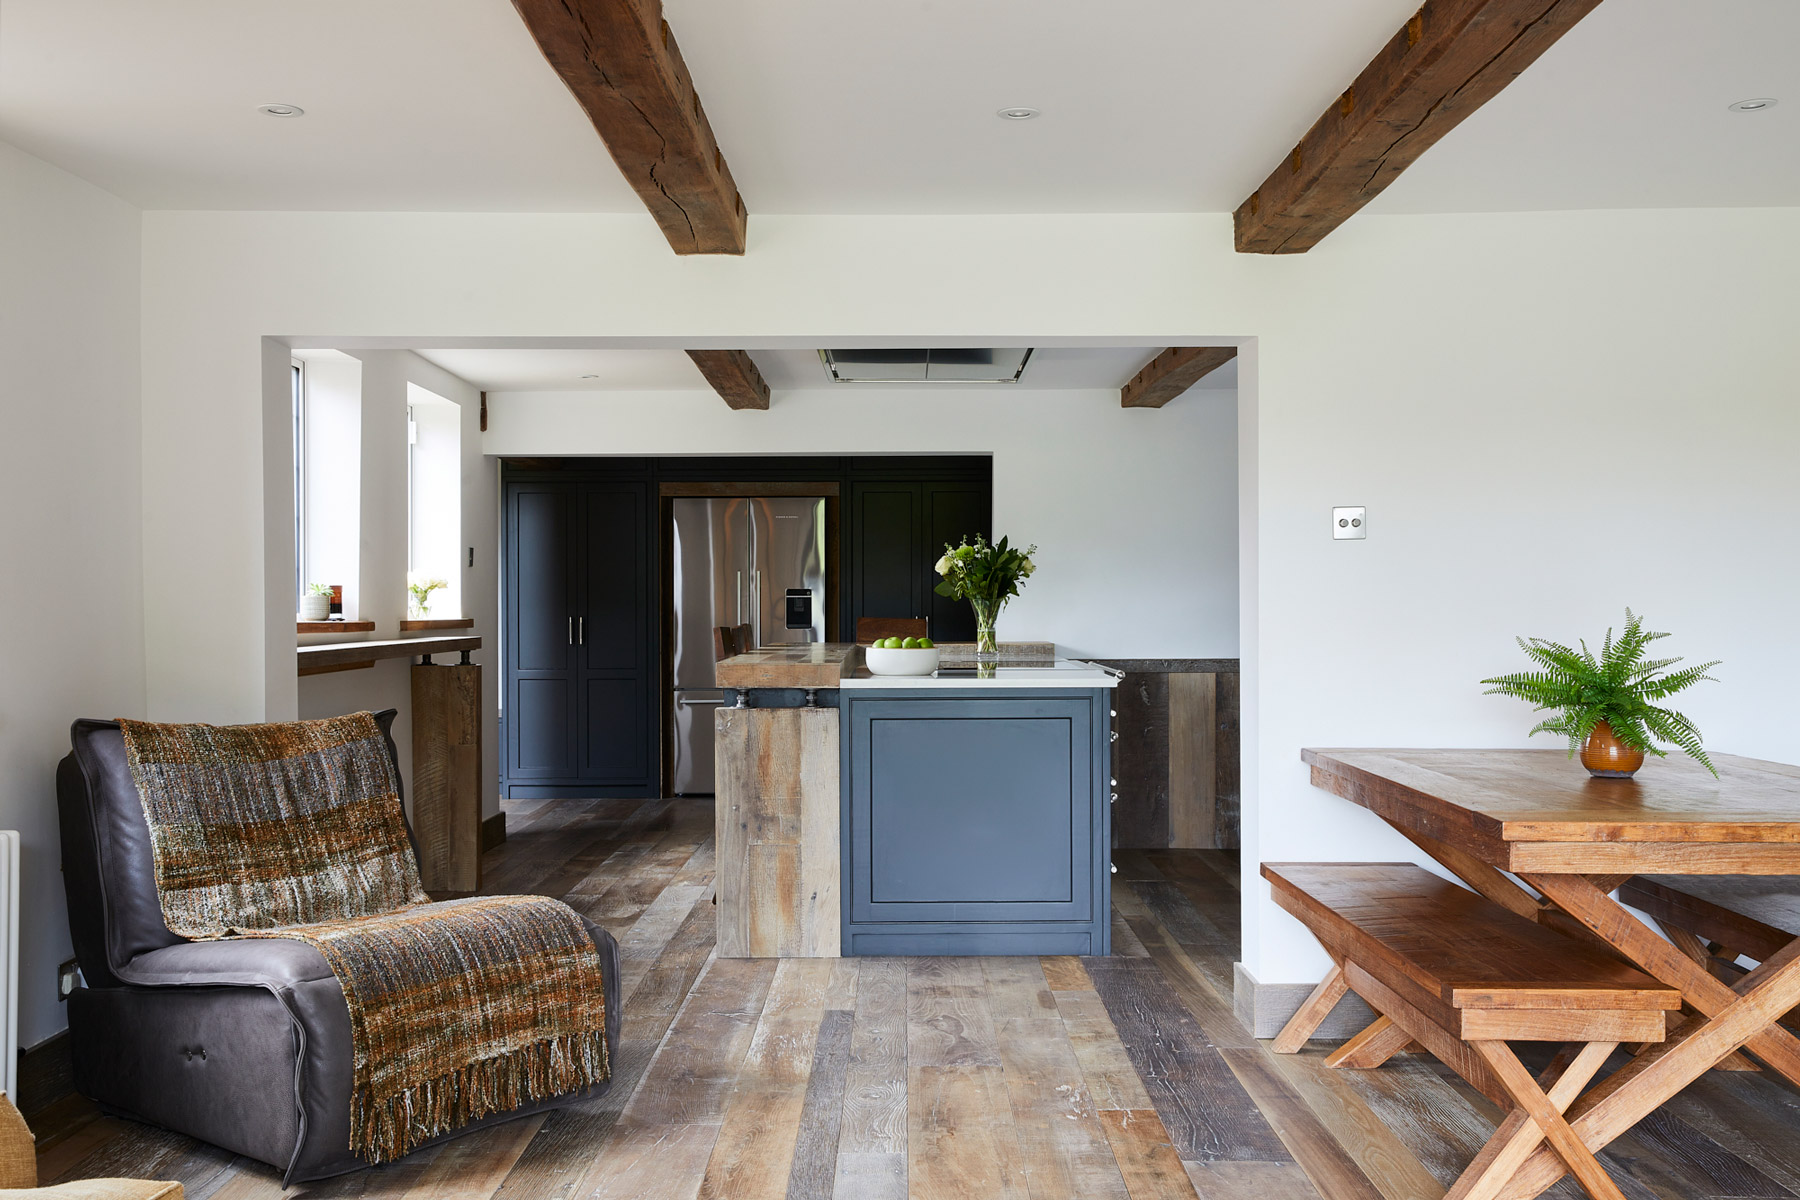 Open plan kitchen with reclaimed flooring and bespoke painted kitchen